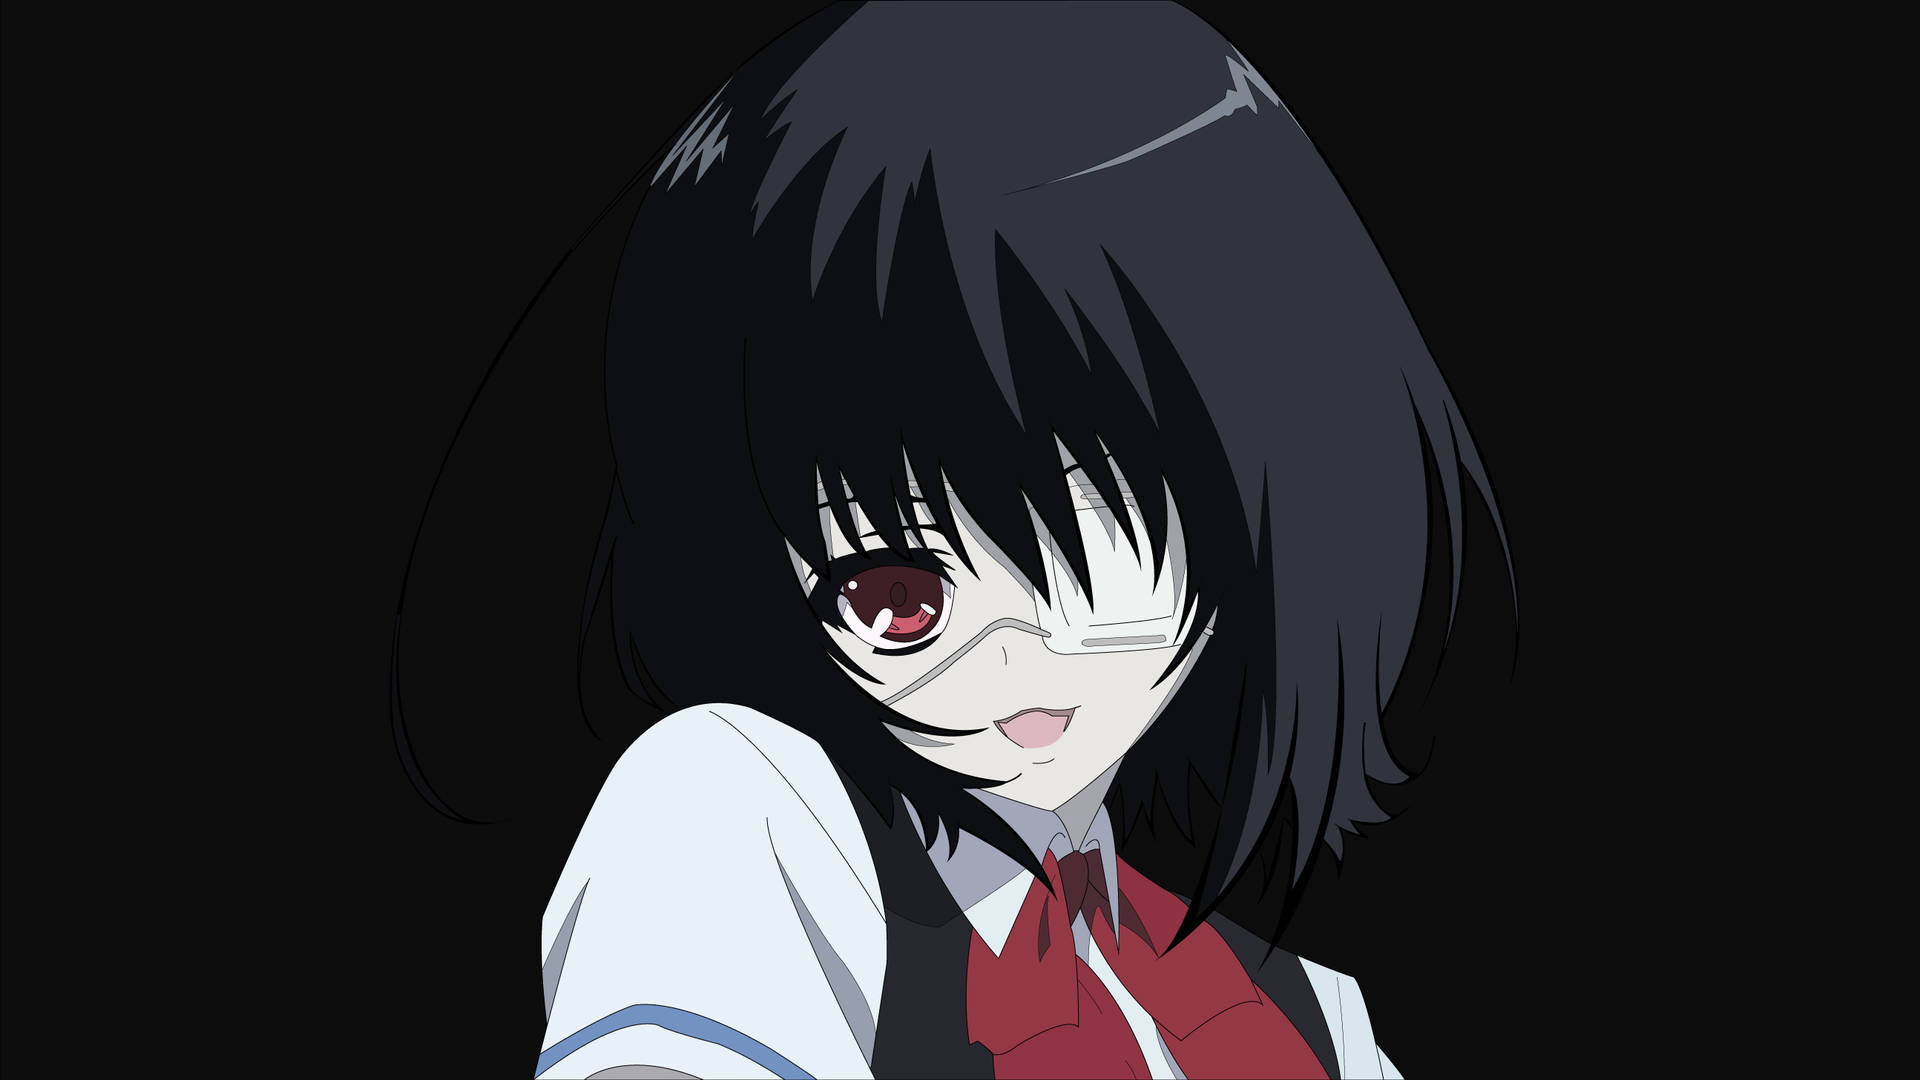 Another The Girl With Red Eyes Wallpaper